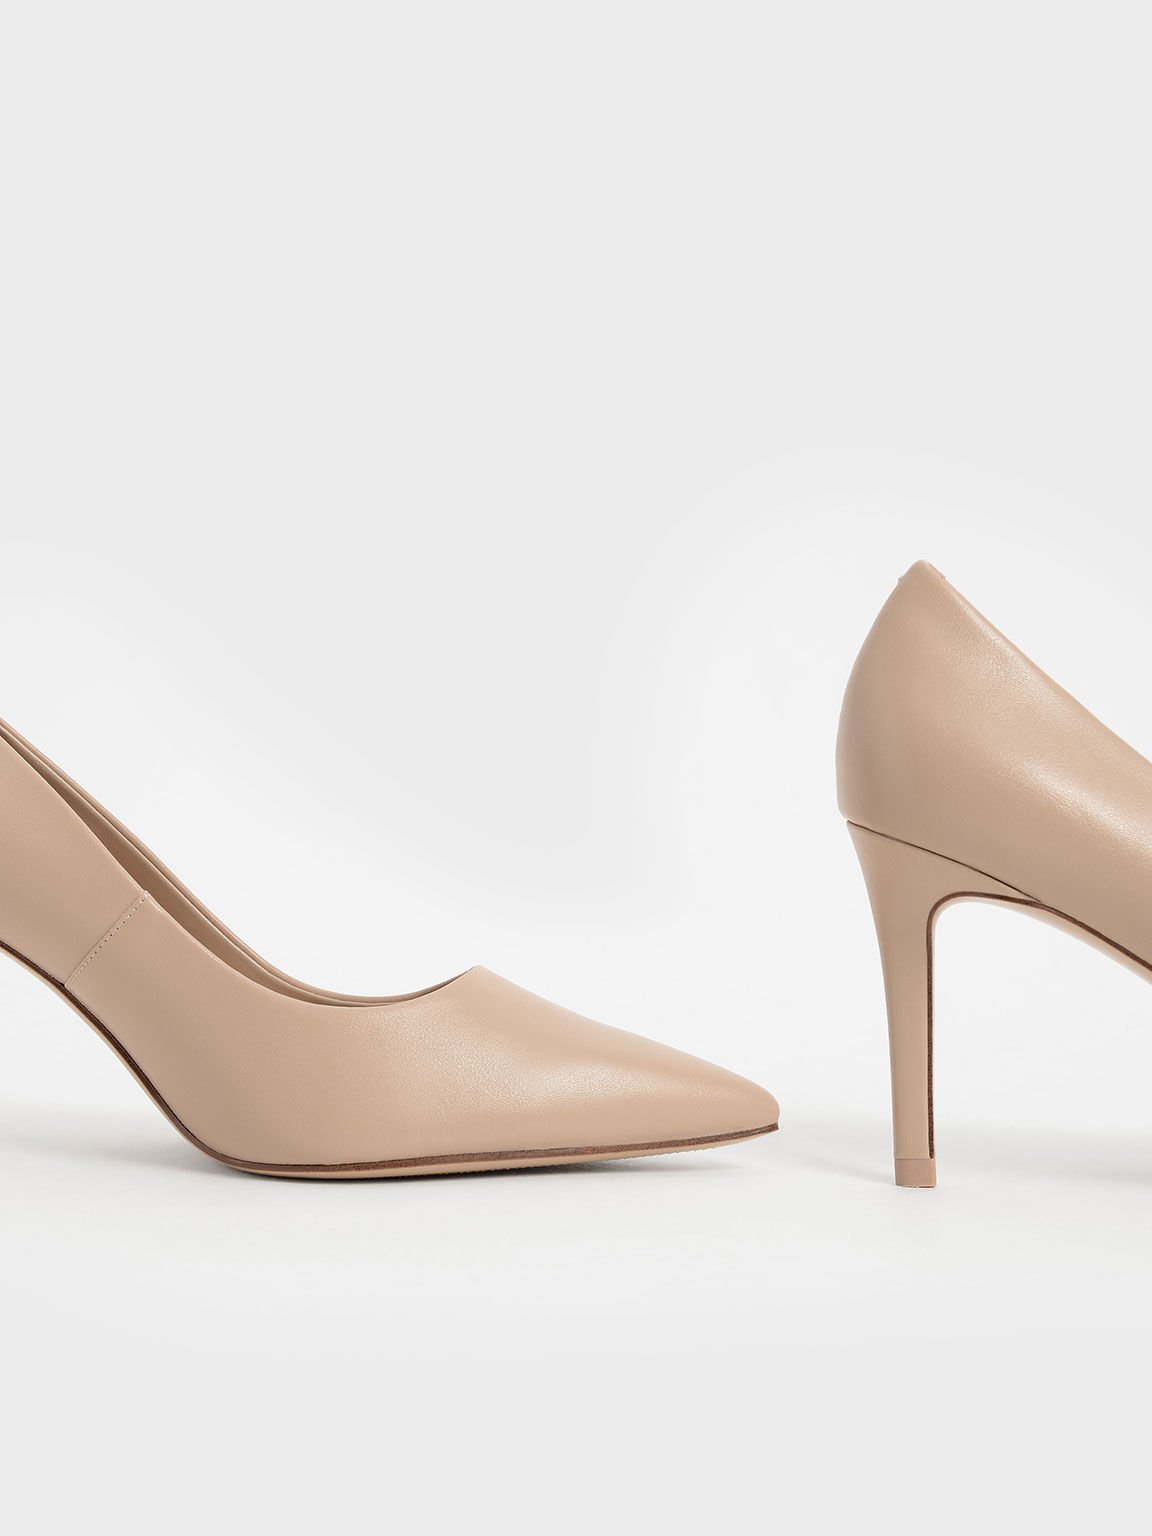 Pointed Toe Stiletto Pumps, Nude, hi-res